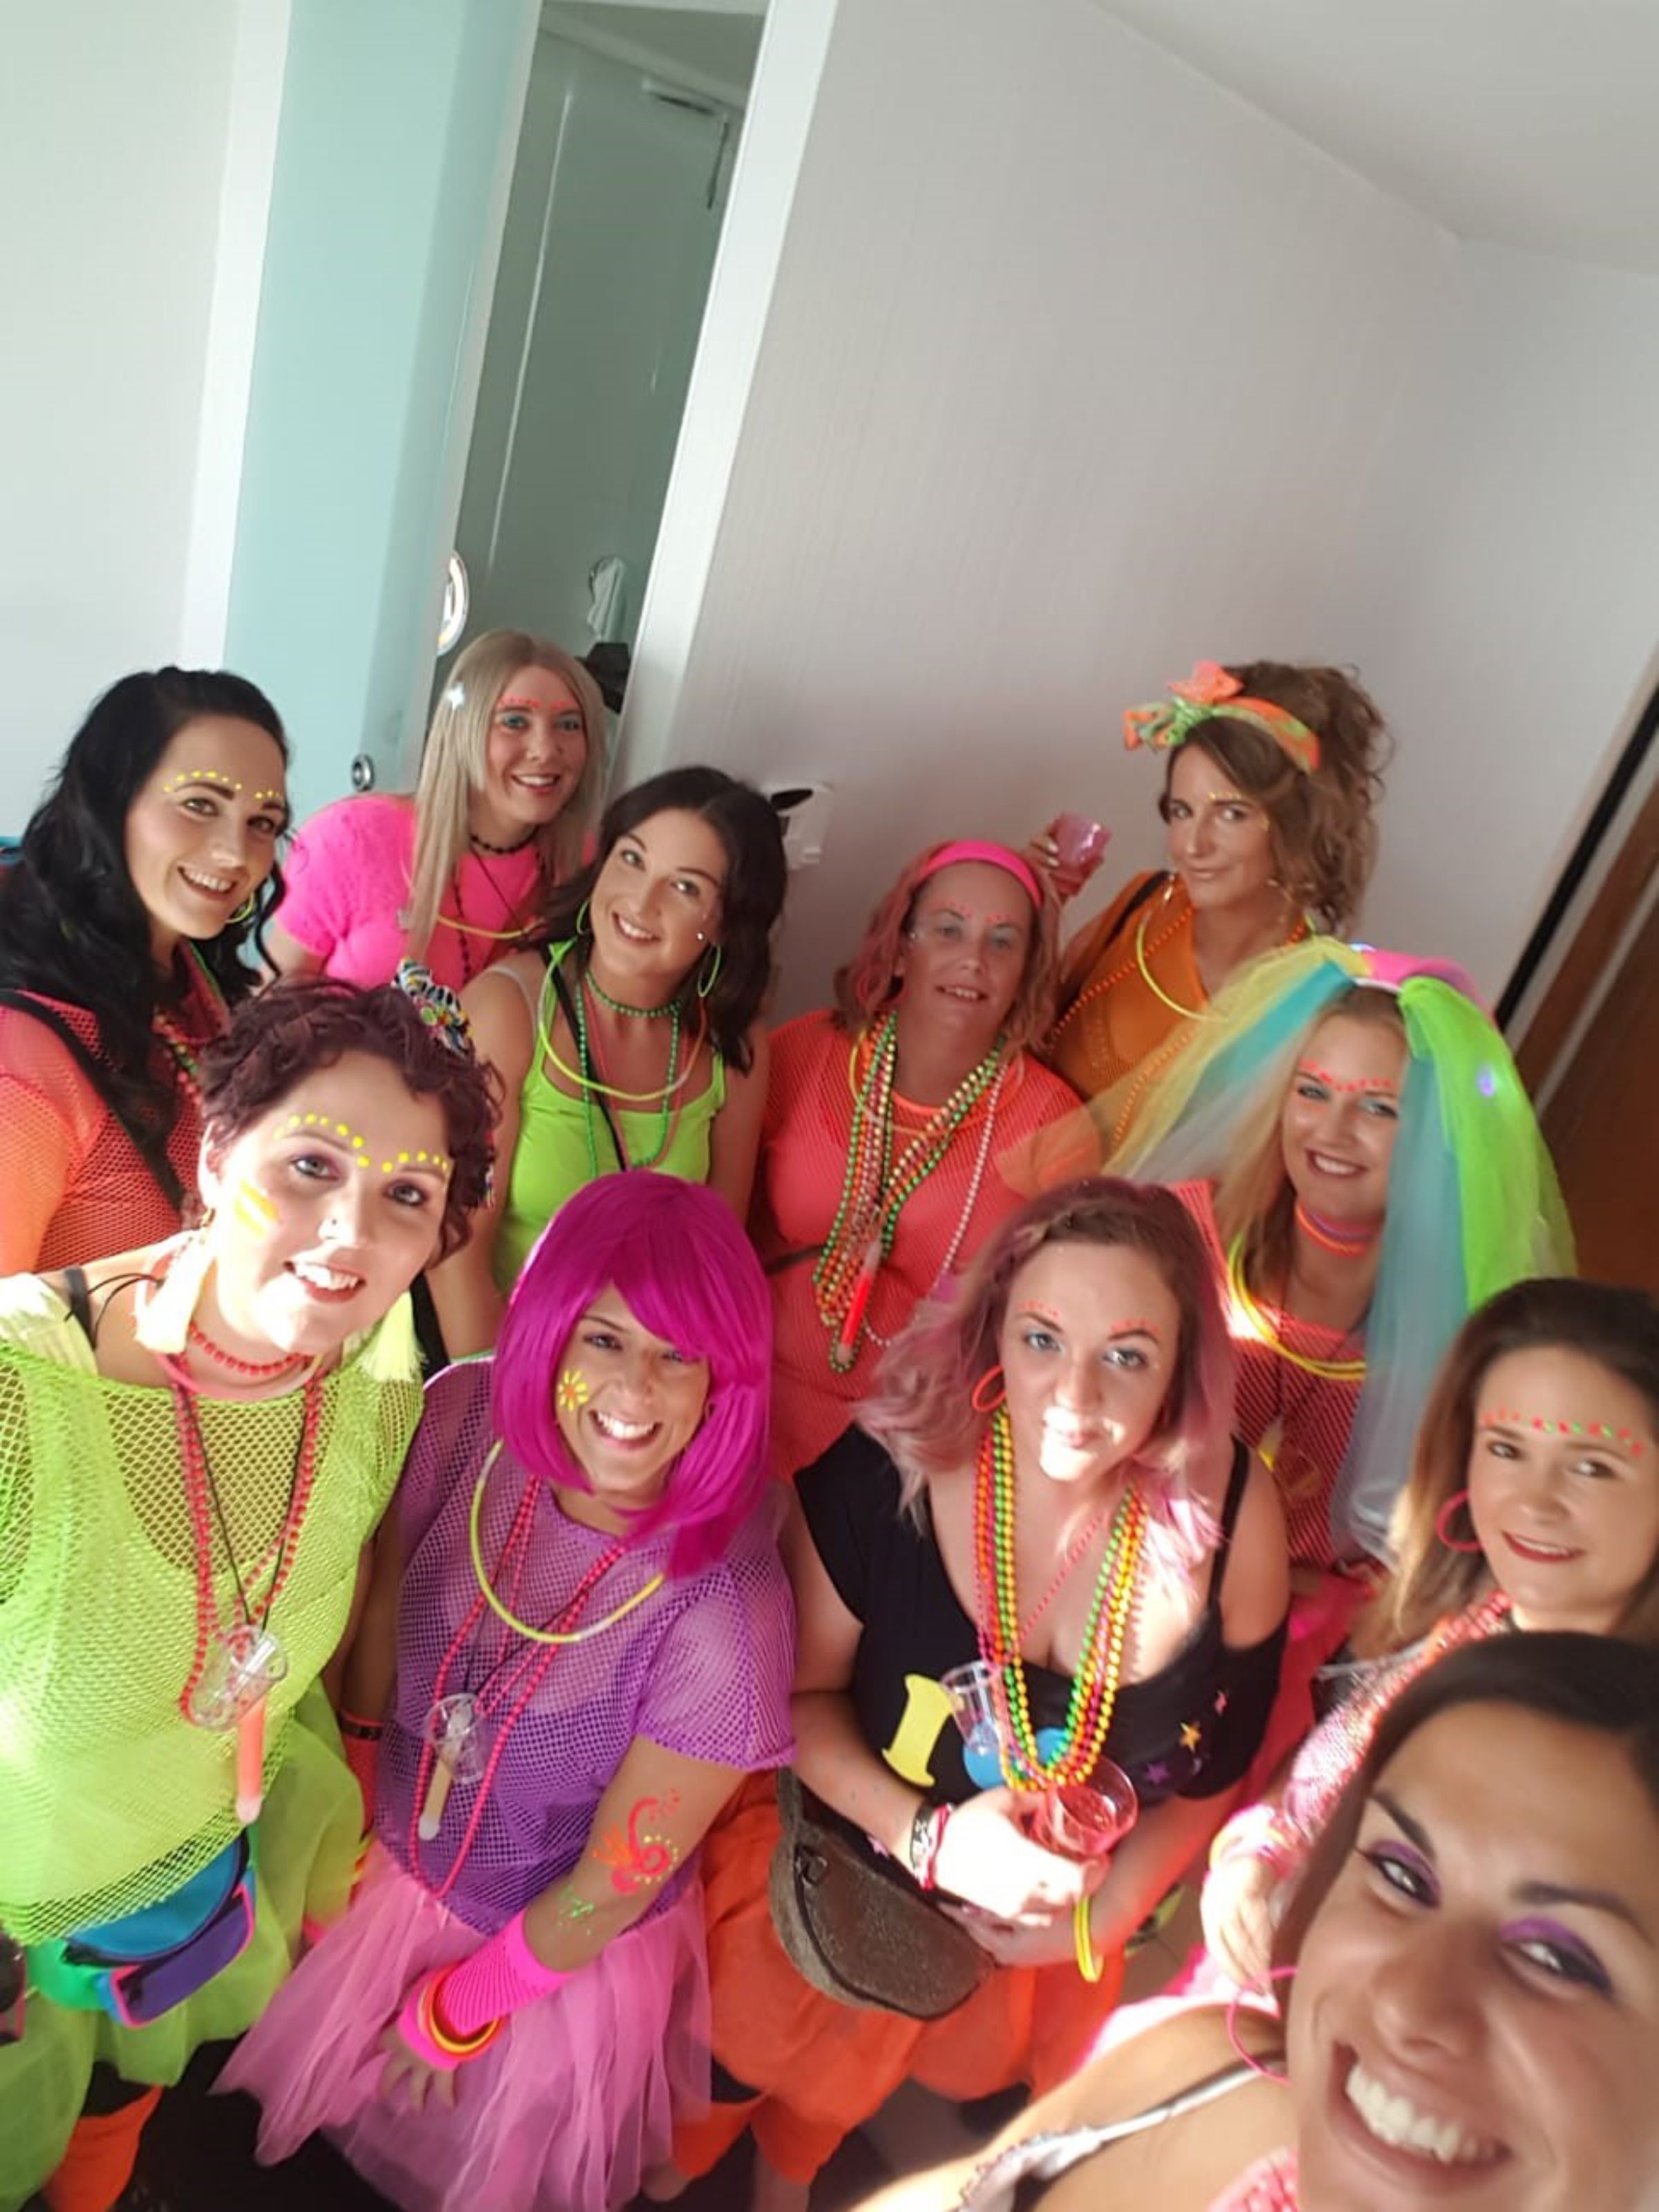 Newcastle Hen Party Activities Lots Of Ideas